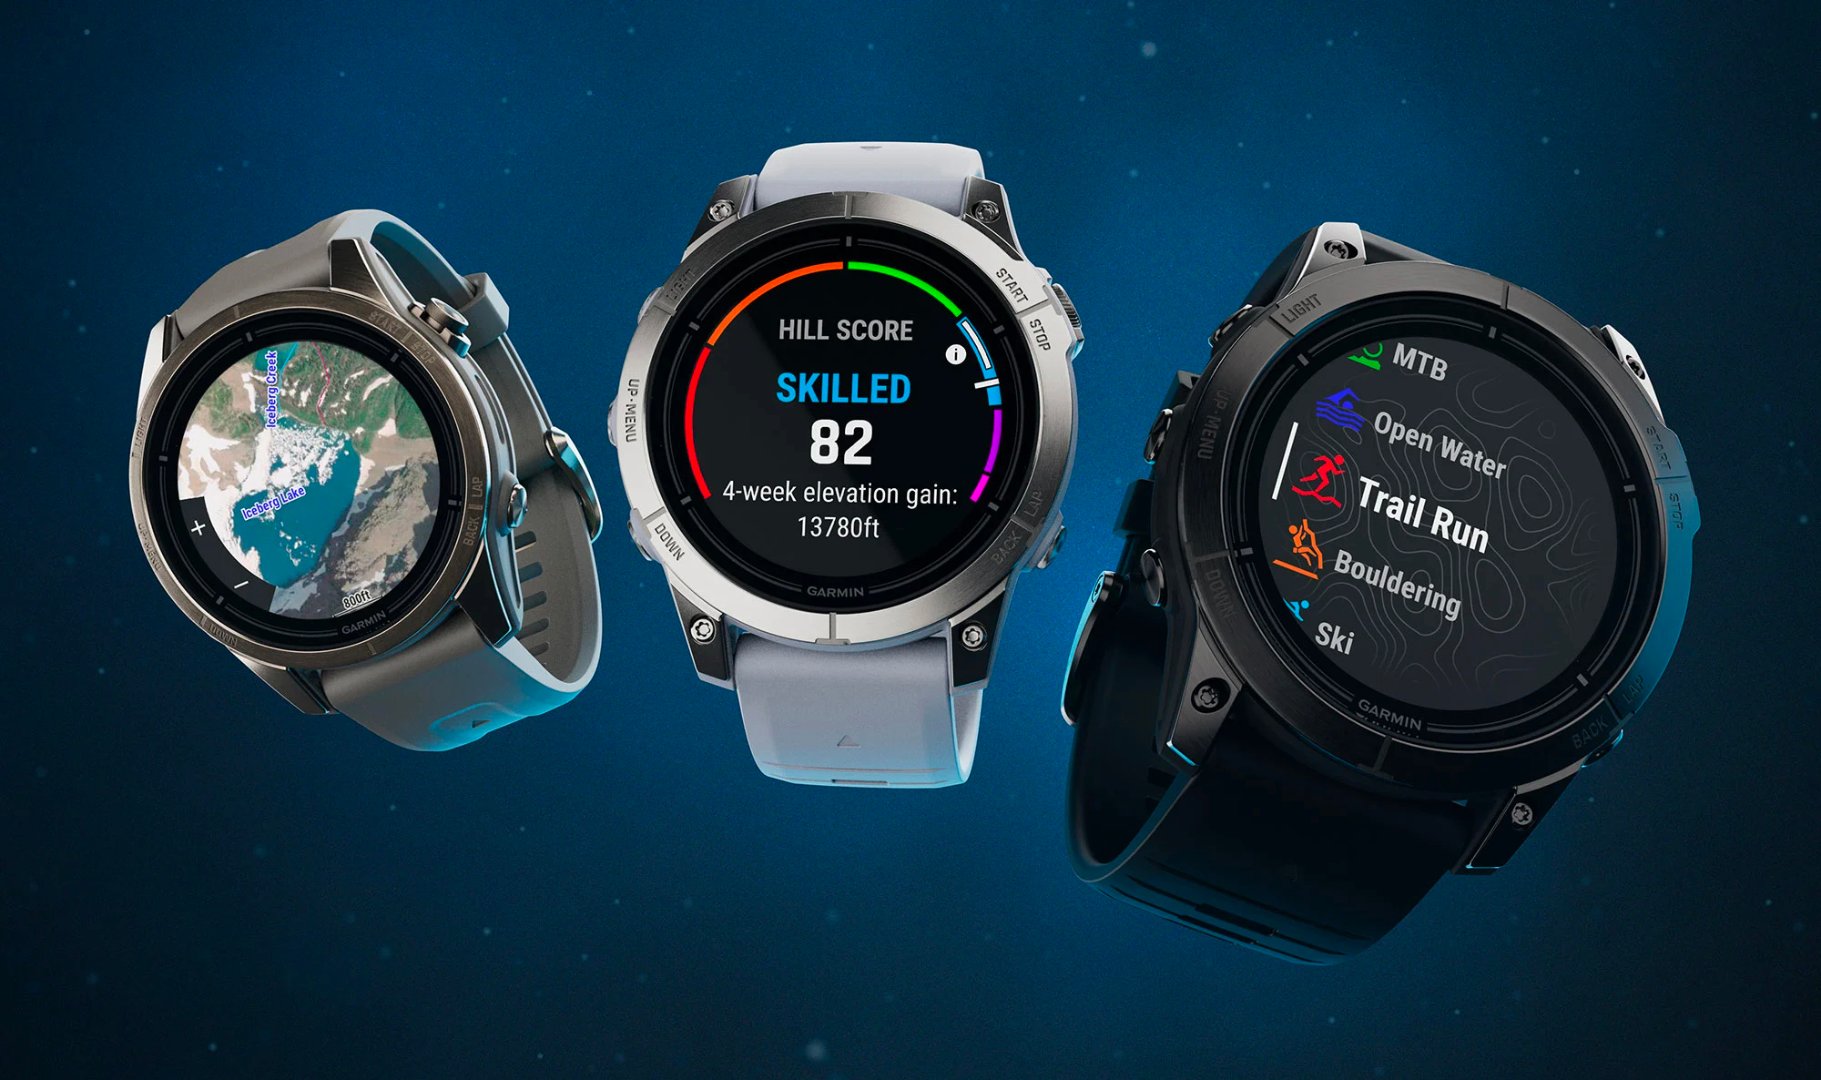 Garmin Epix 2 Pro series smartwatch with an AMOLED display
offered in 3 sizes Unveiled